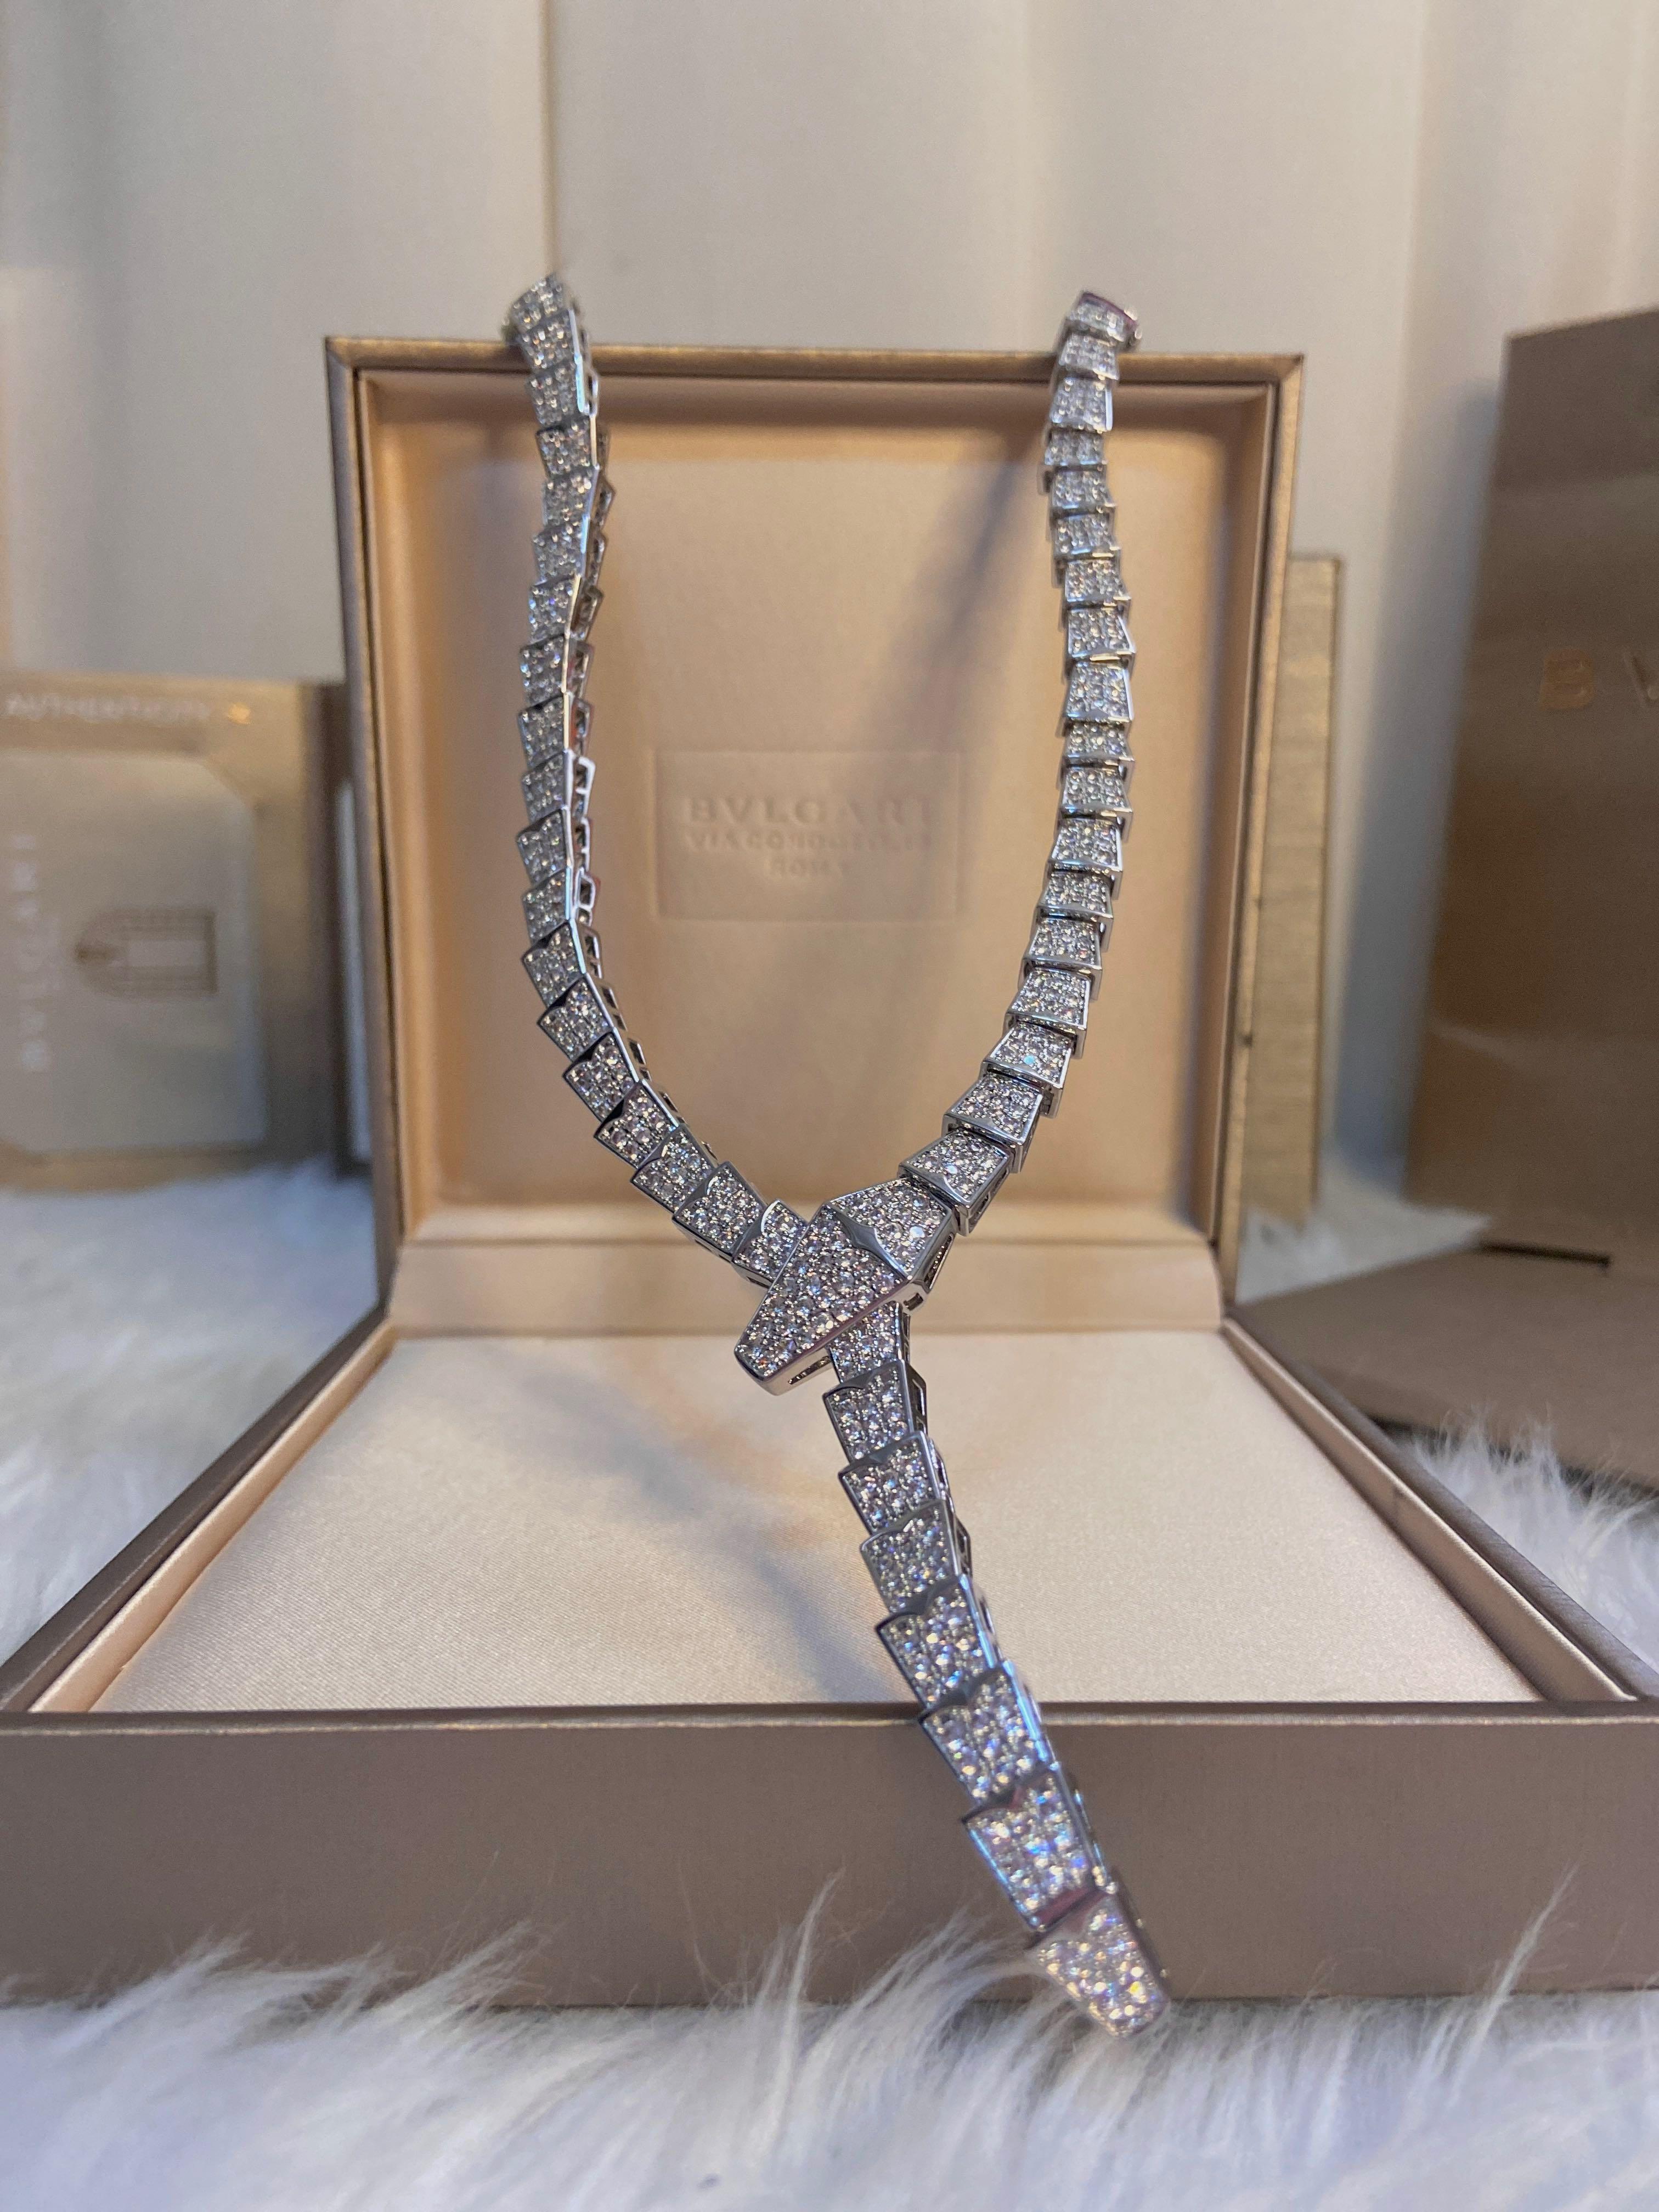 Serpenti Viper Necklace - 8 For Sale on 1stDibs | serpenti viper necklace  price, bvlgari necklace snake, bulgari necklace snake